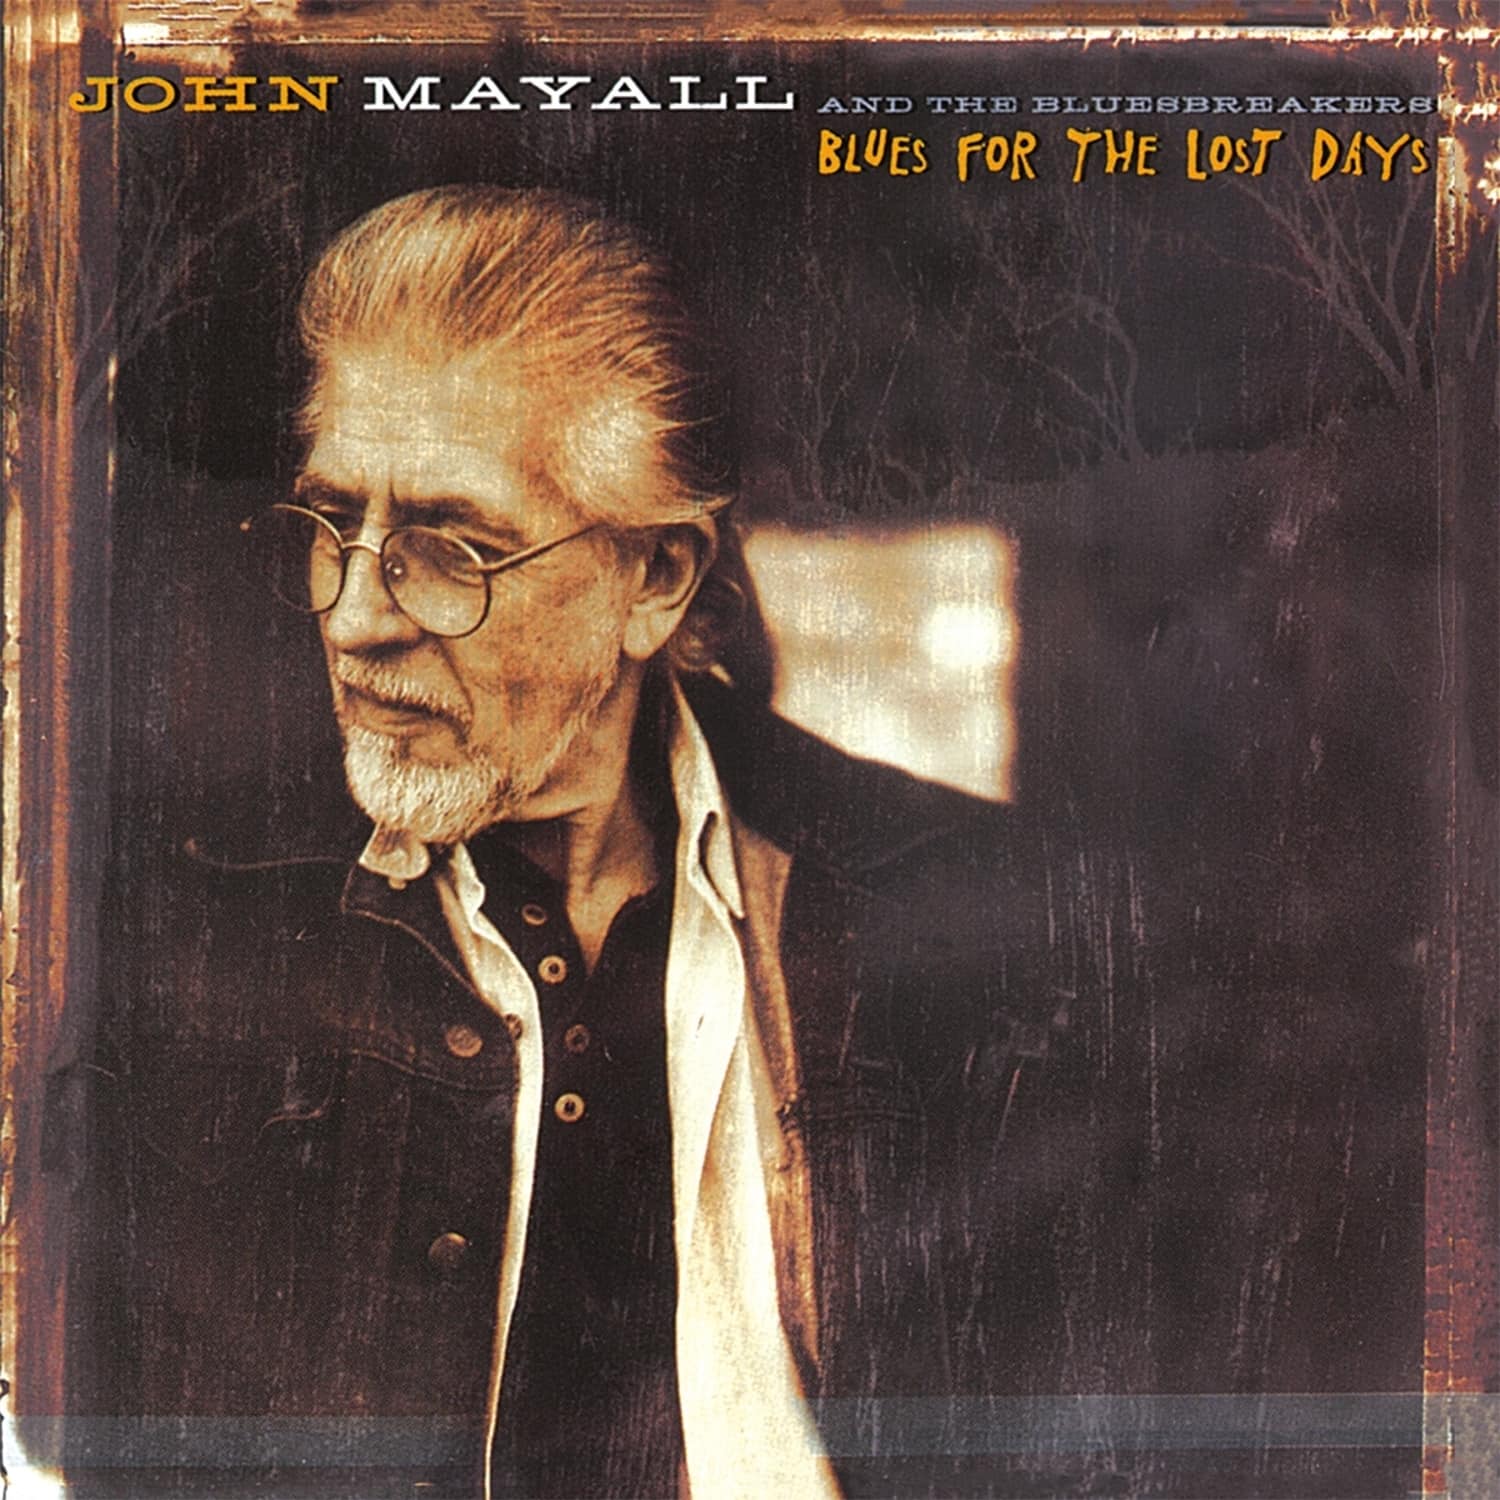 John Mayall - BLUES FOR THE LOST DAYS 